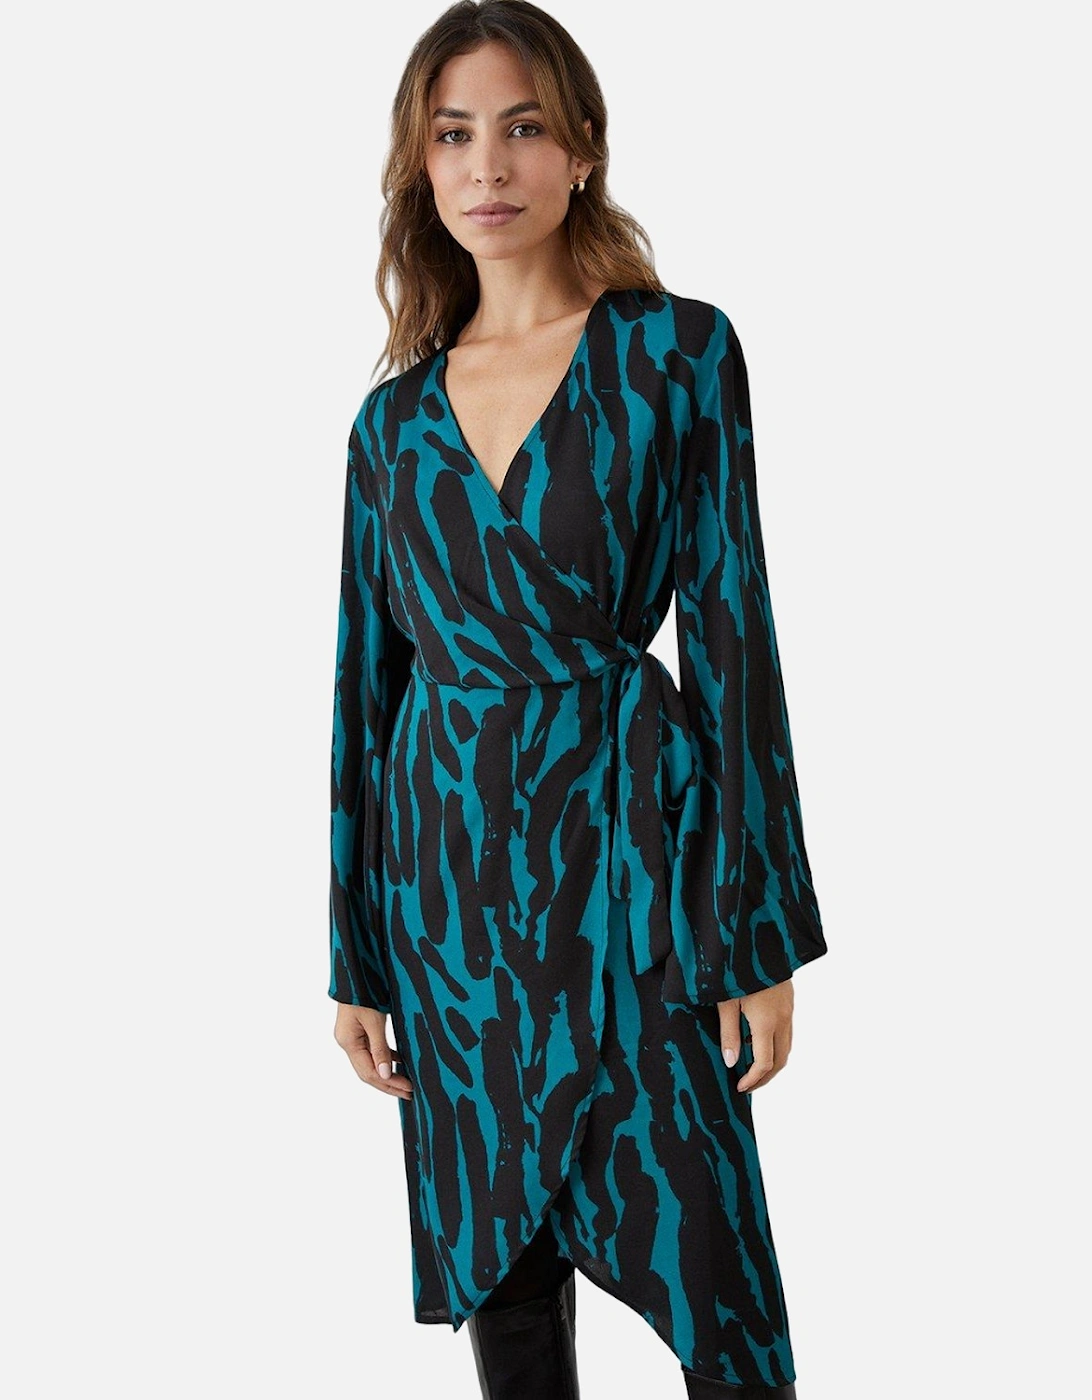 Womens/Ladies Abstract Wrap Dress